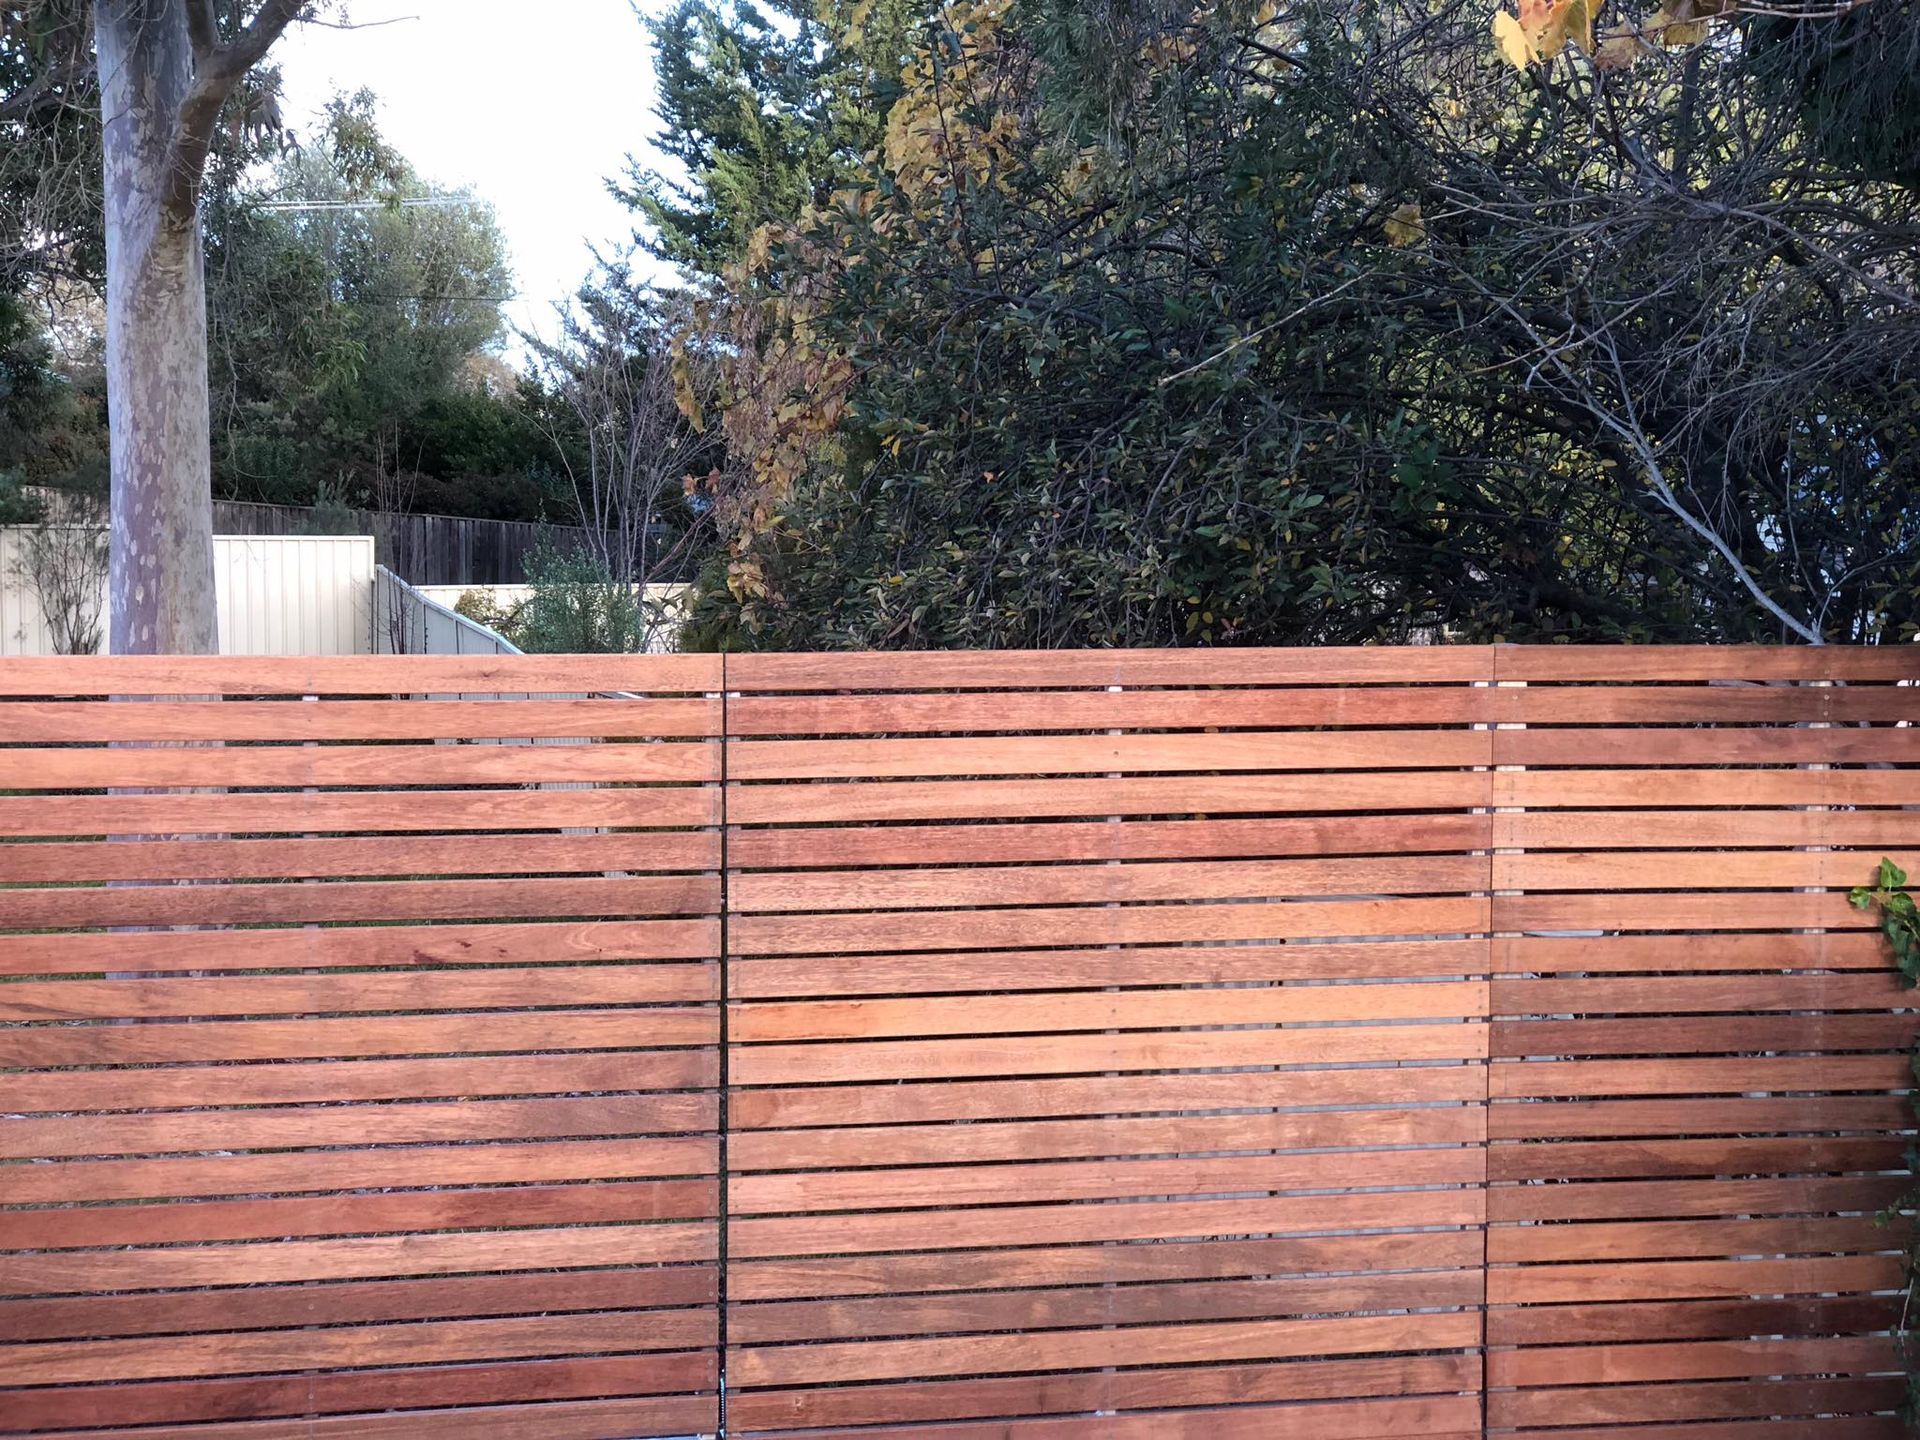 A wooden fence with trees in the background